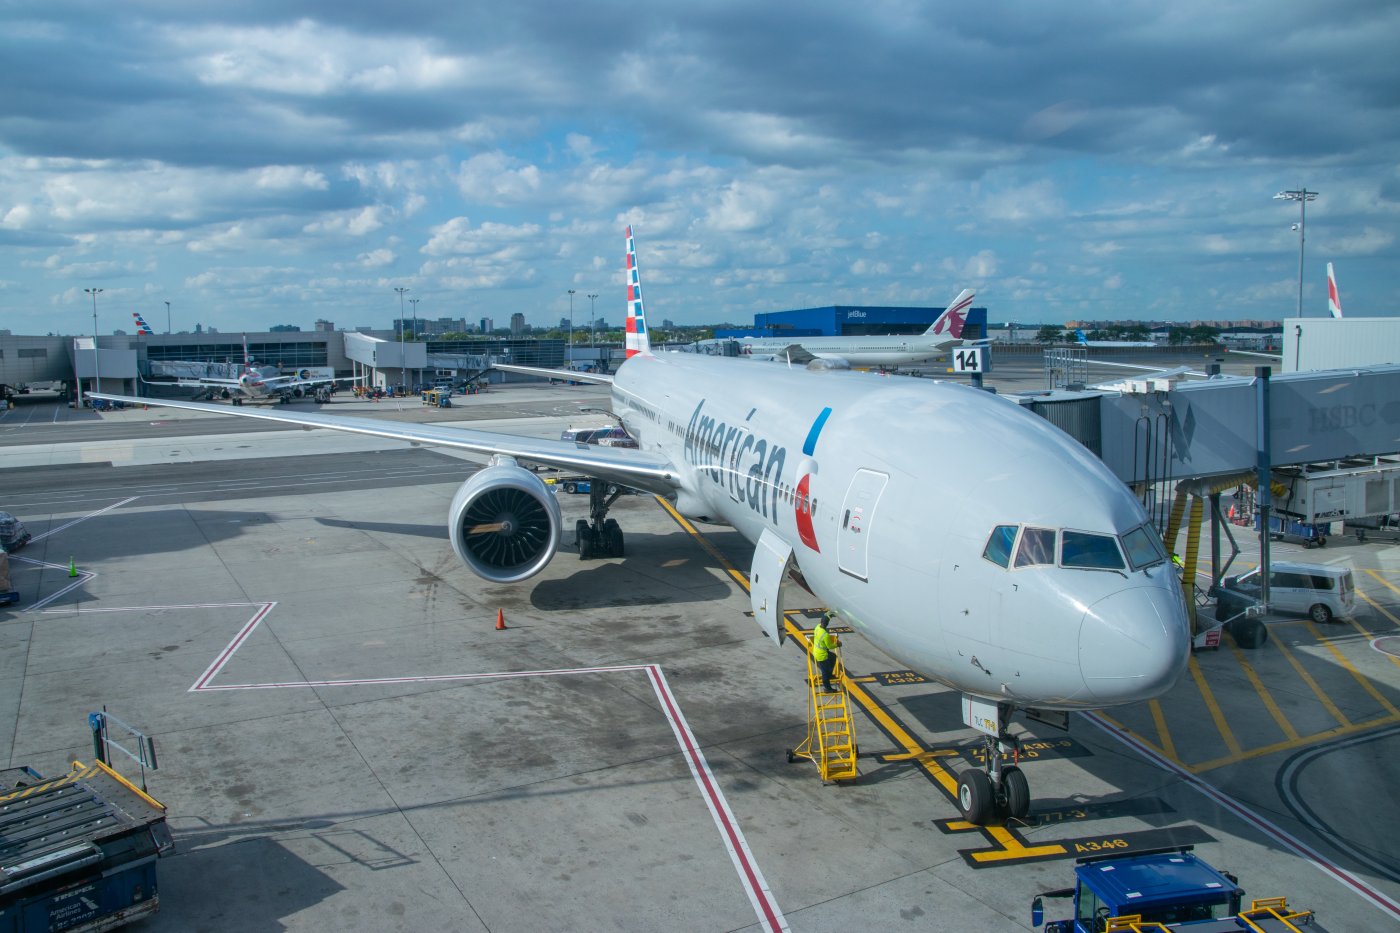 Flight review: American Airlines from New York to London in